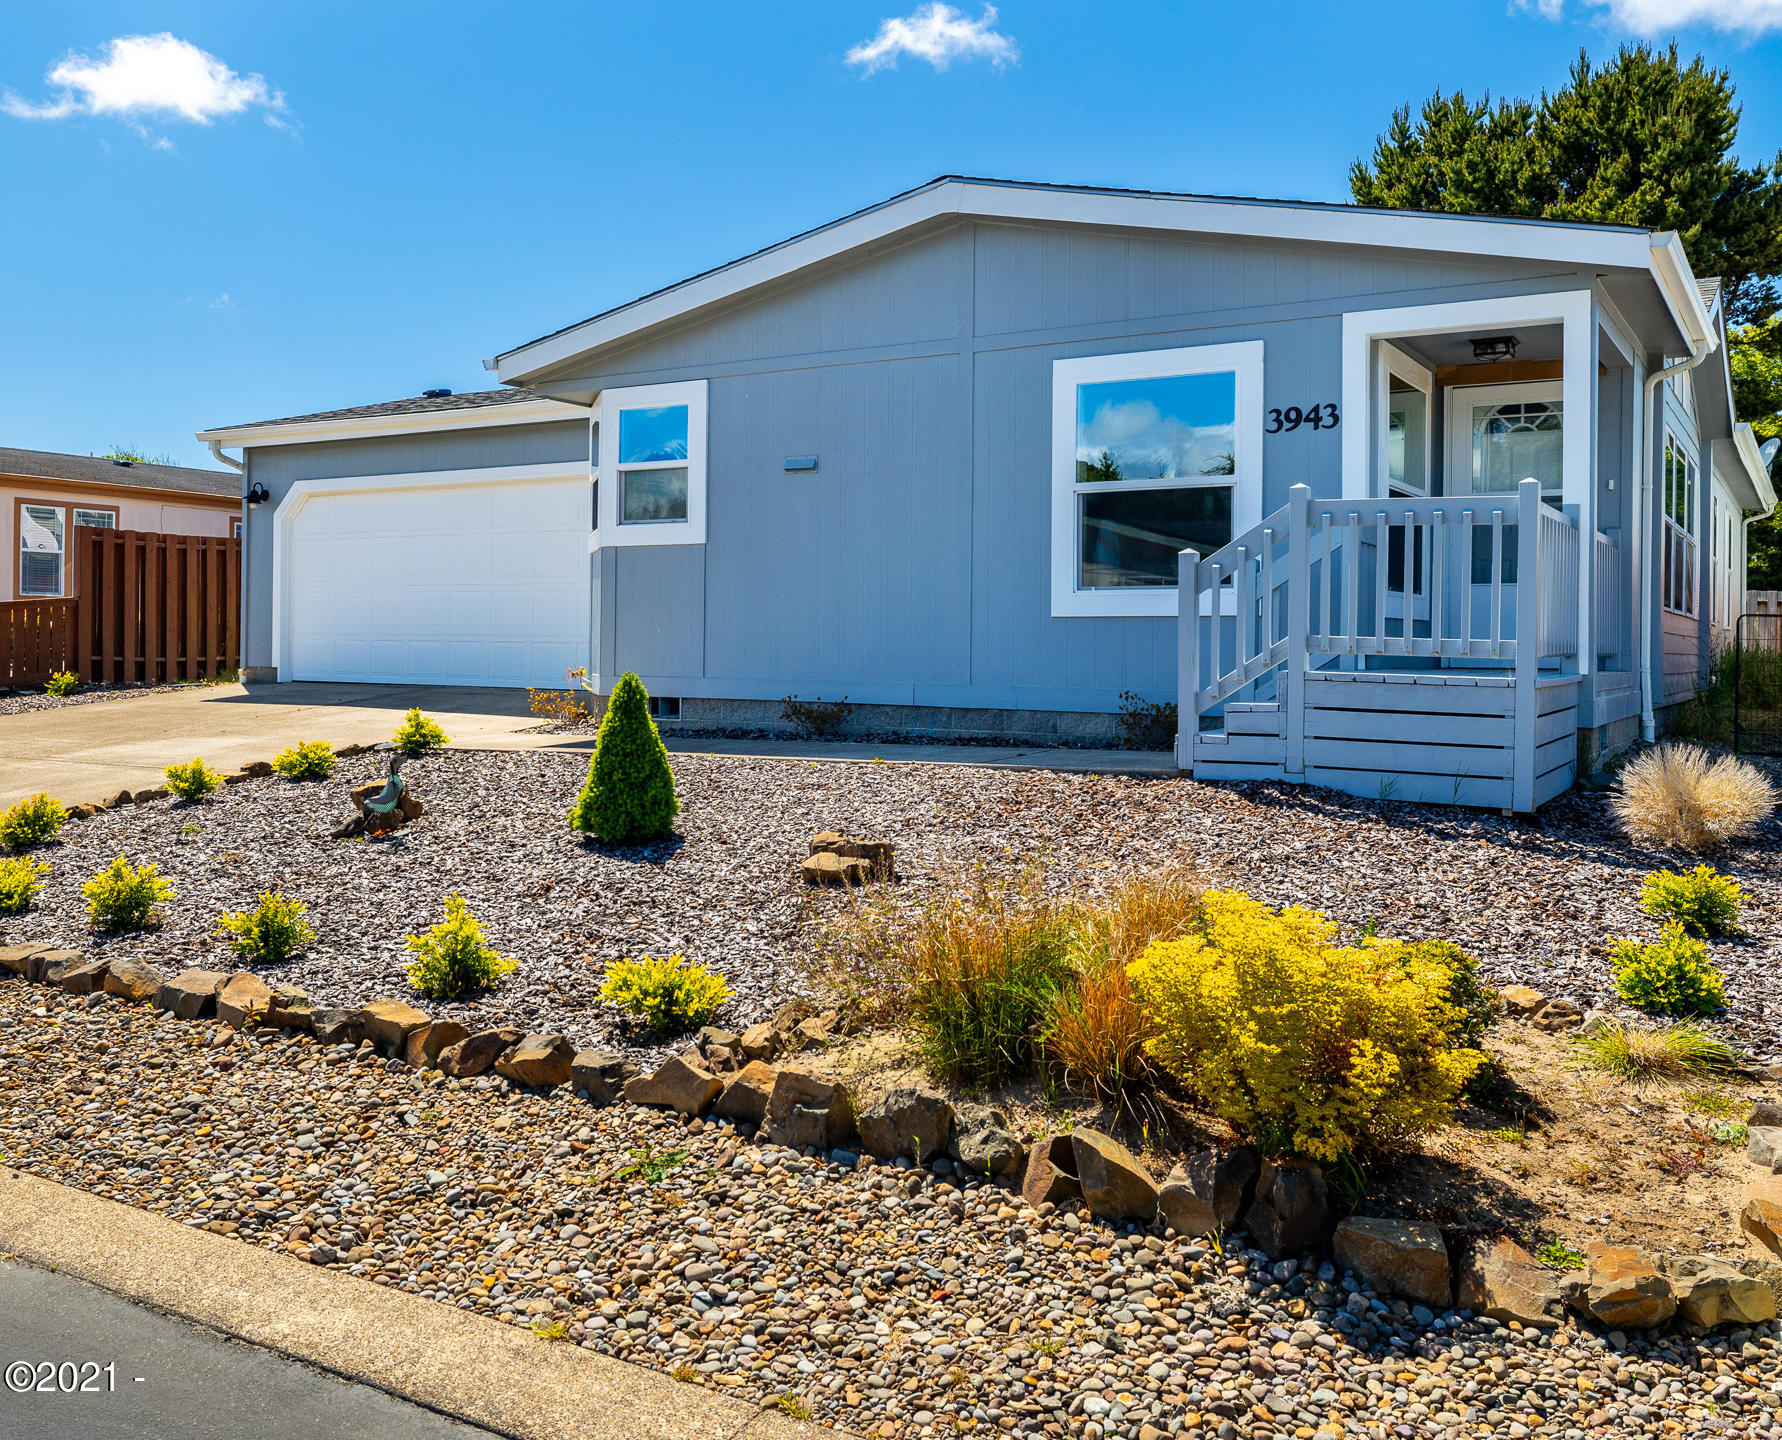 3943 Summit Ridge Cir Depoe Bay, Gleneden Beach, Lincoln City, Newport, Otis, Rose Lodge, Seal Rock, Waldport, Yachats, To Home Listings - Amy Plechaty, Emerald Coast Realty Real Estate, homes for sale, property for sale